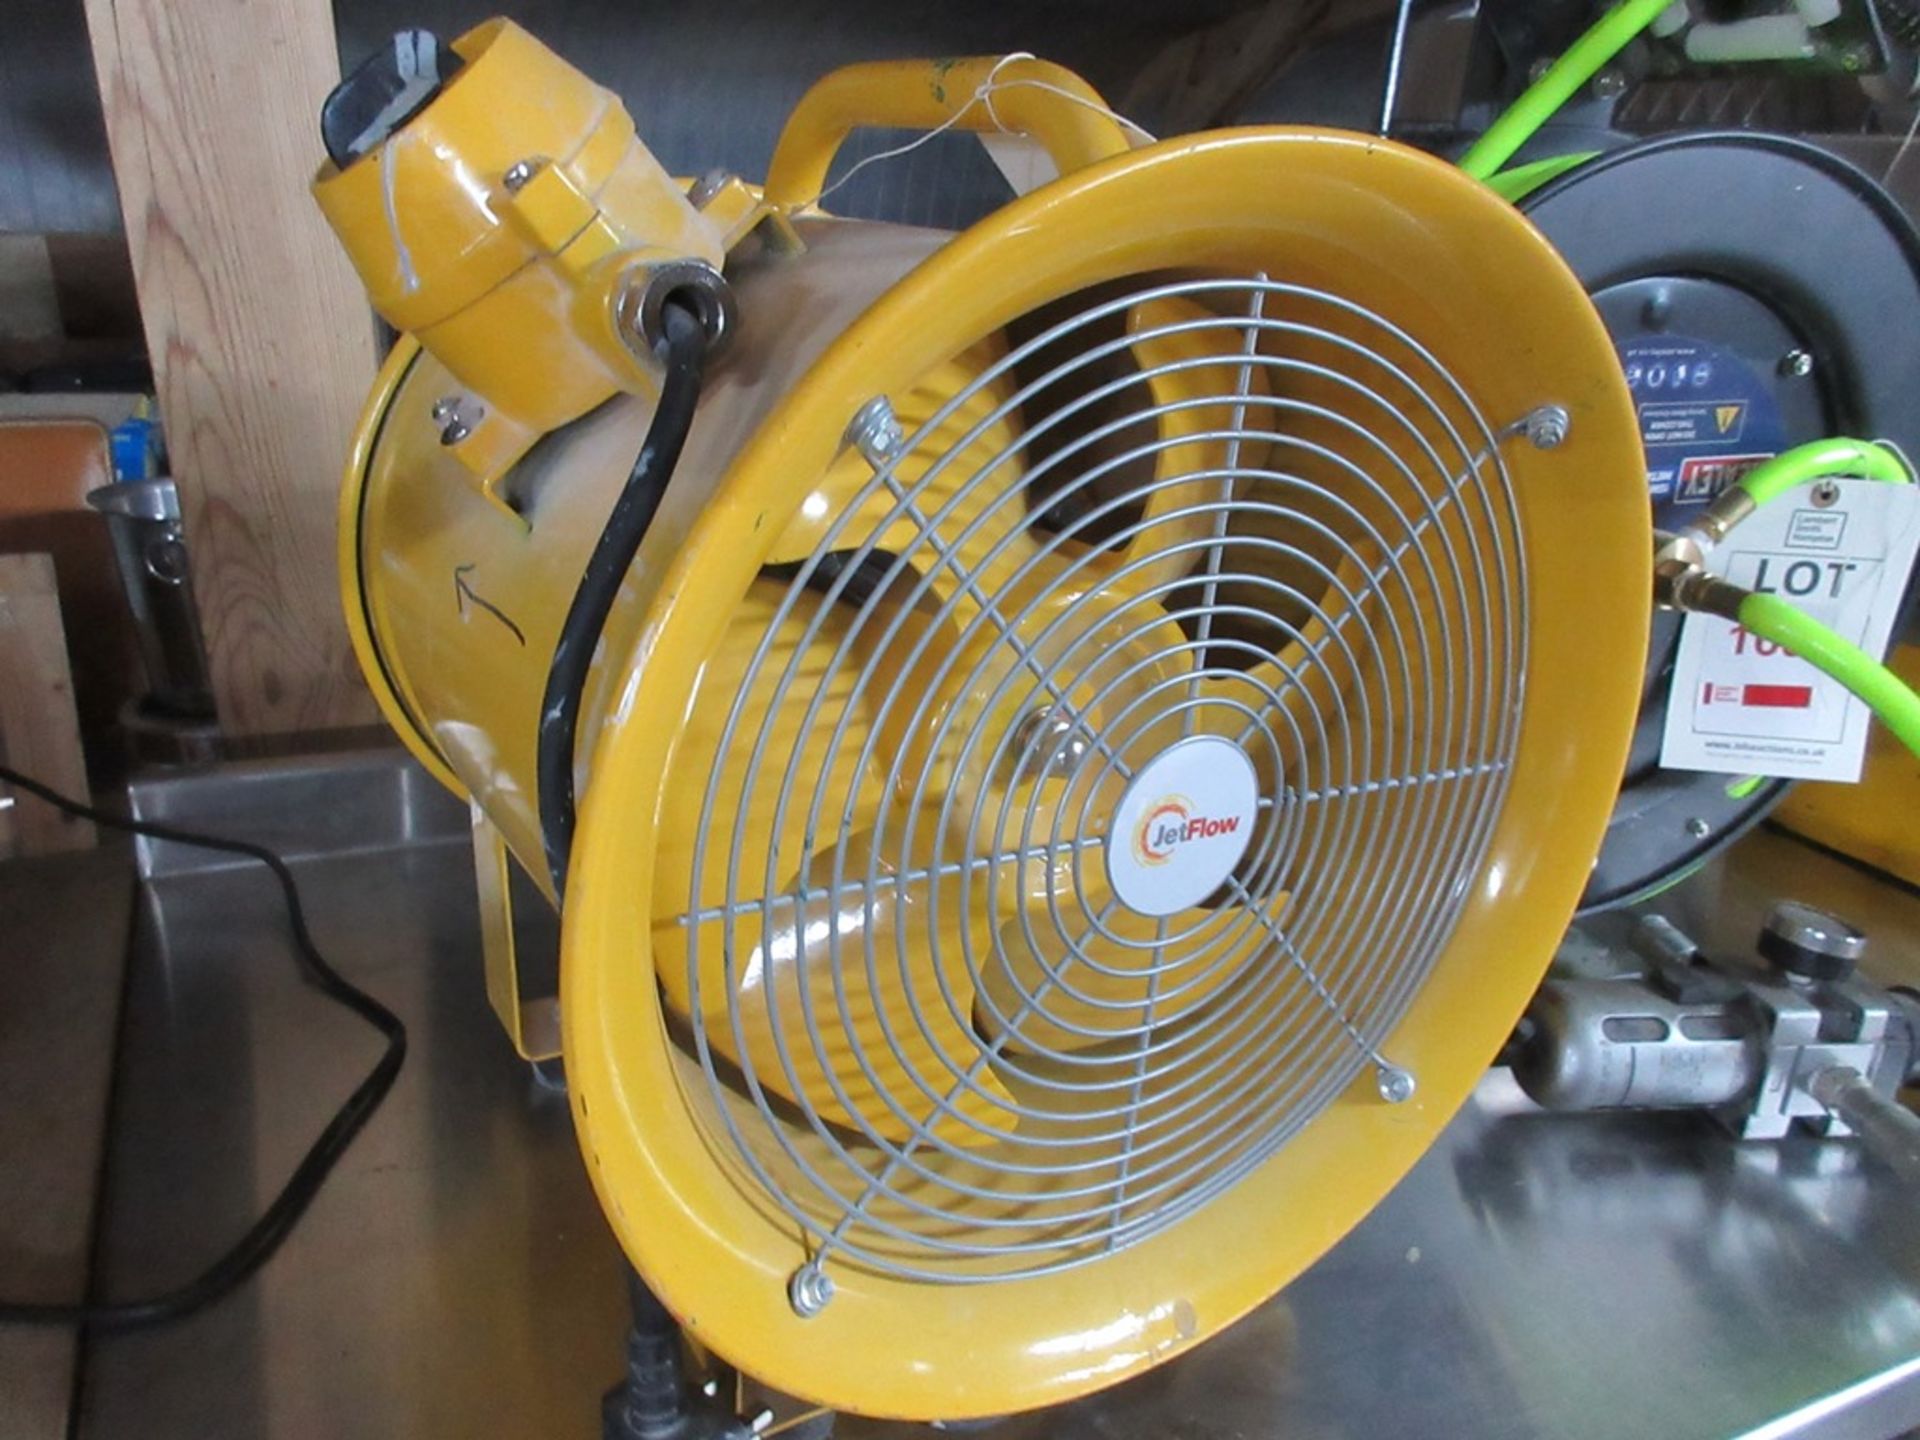 Jet Flow portable explosion proof axial fan, 240v - Image 3 of 4